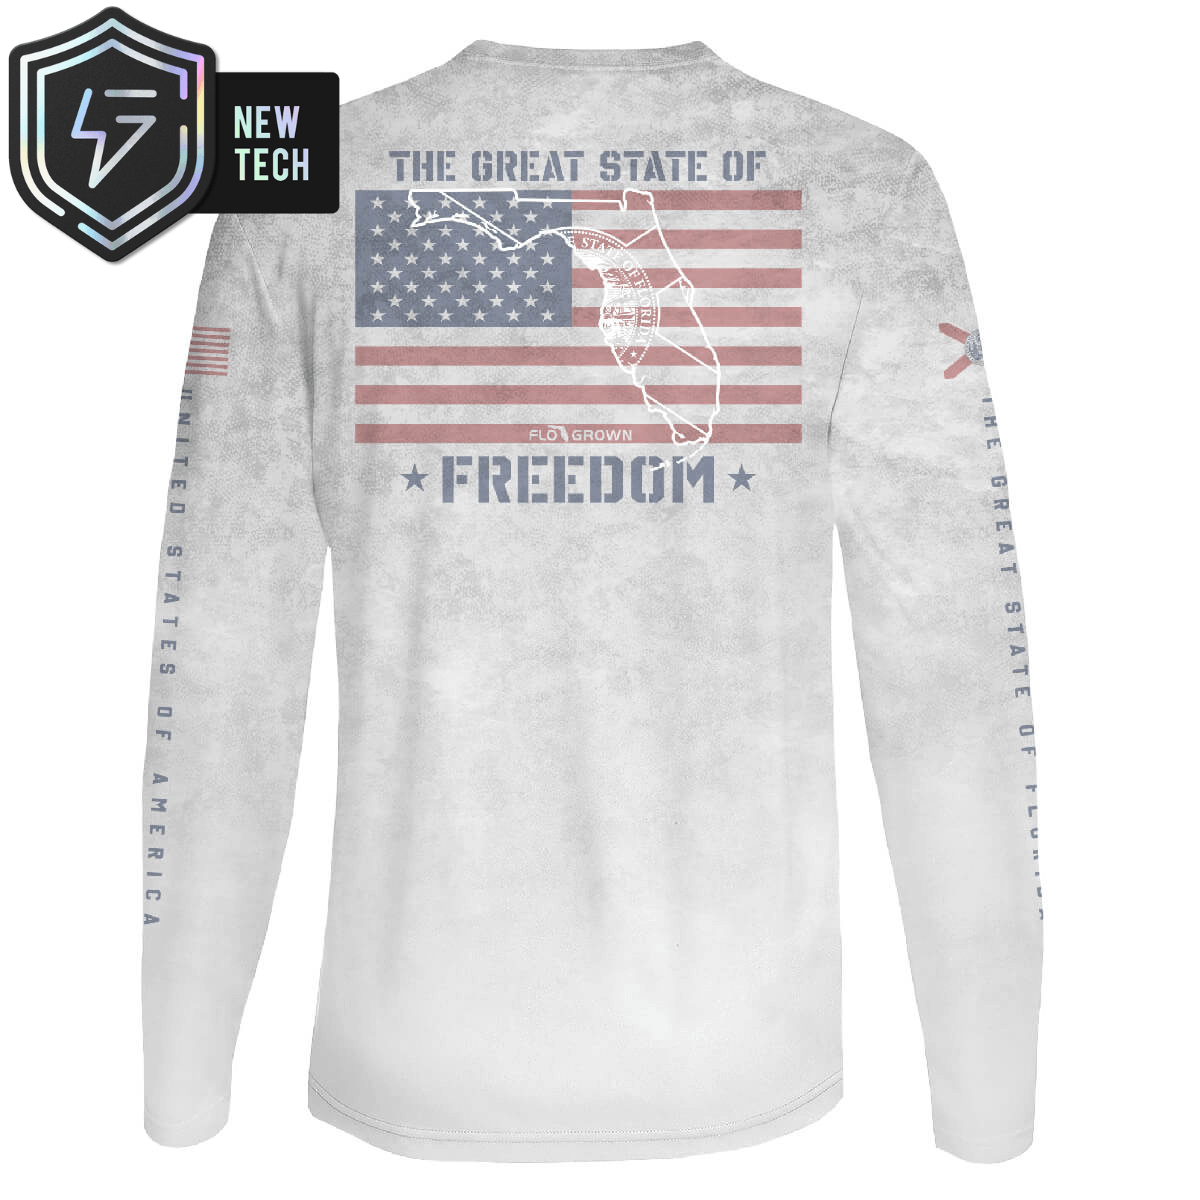 Great State of Freedom Performance Tee